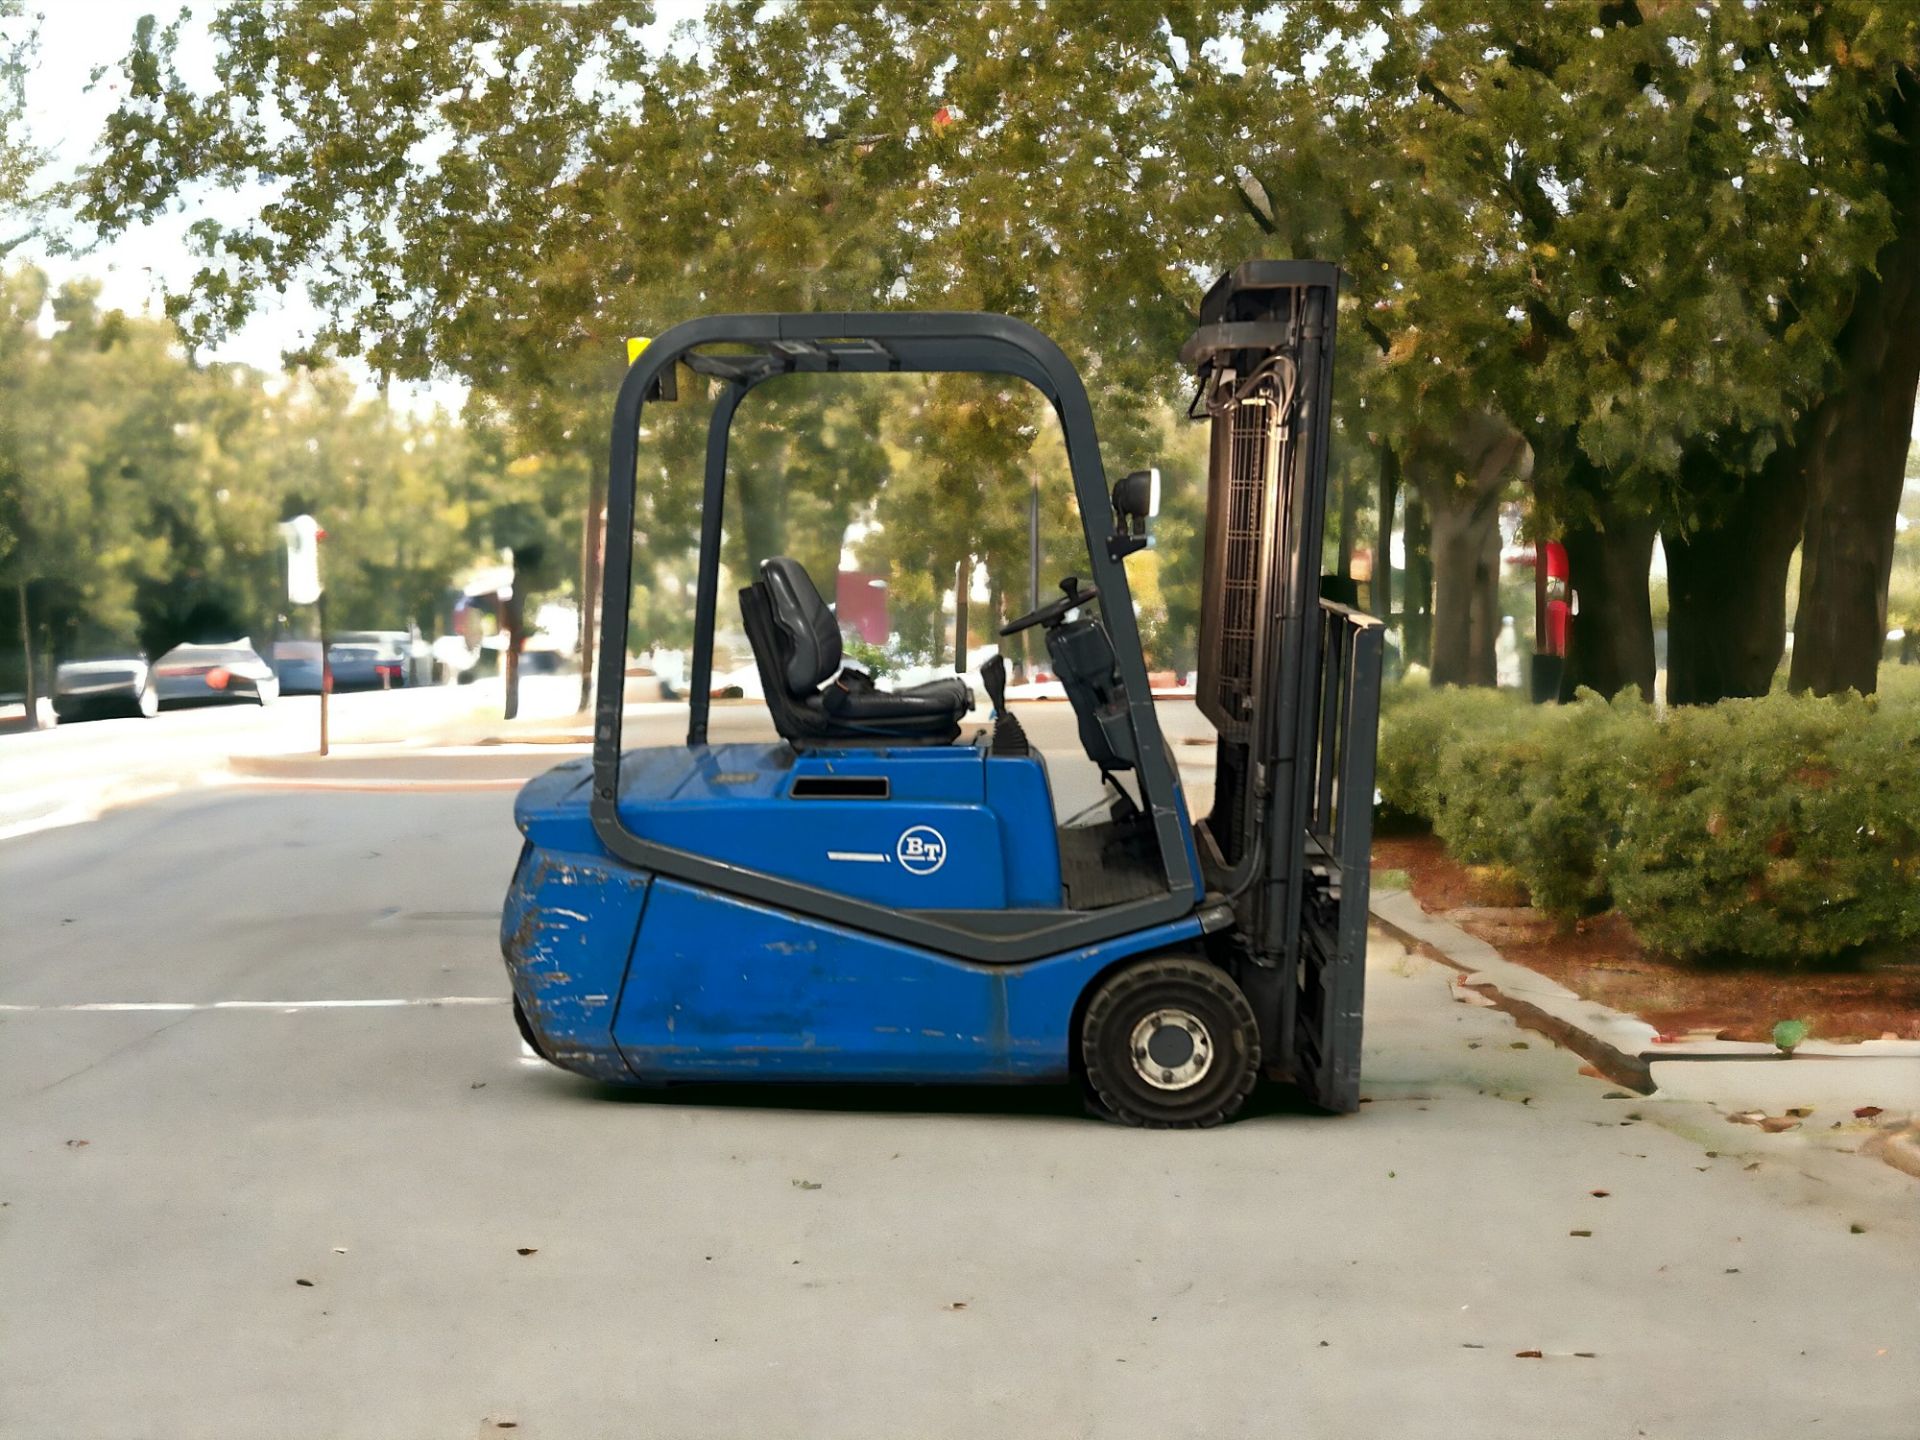 BT ELECTRIC 3-WHEEL FORKLIFT - MODEL CBE1.6T (2002) **(INCLUDES CHARGER)** - Image 5 of 6